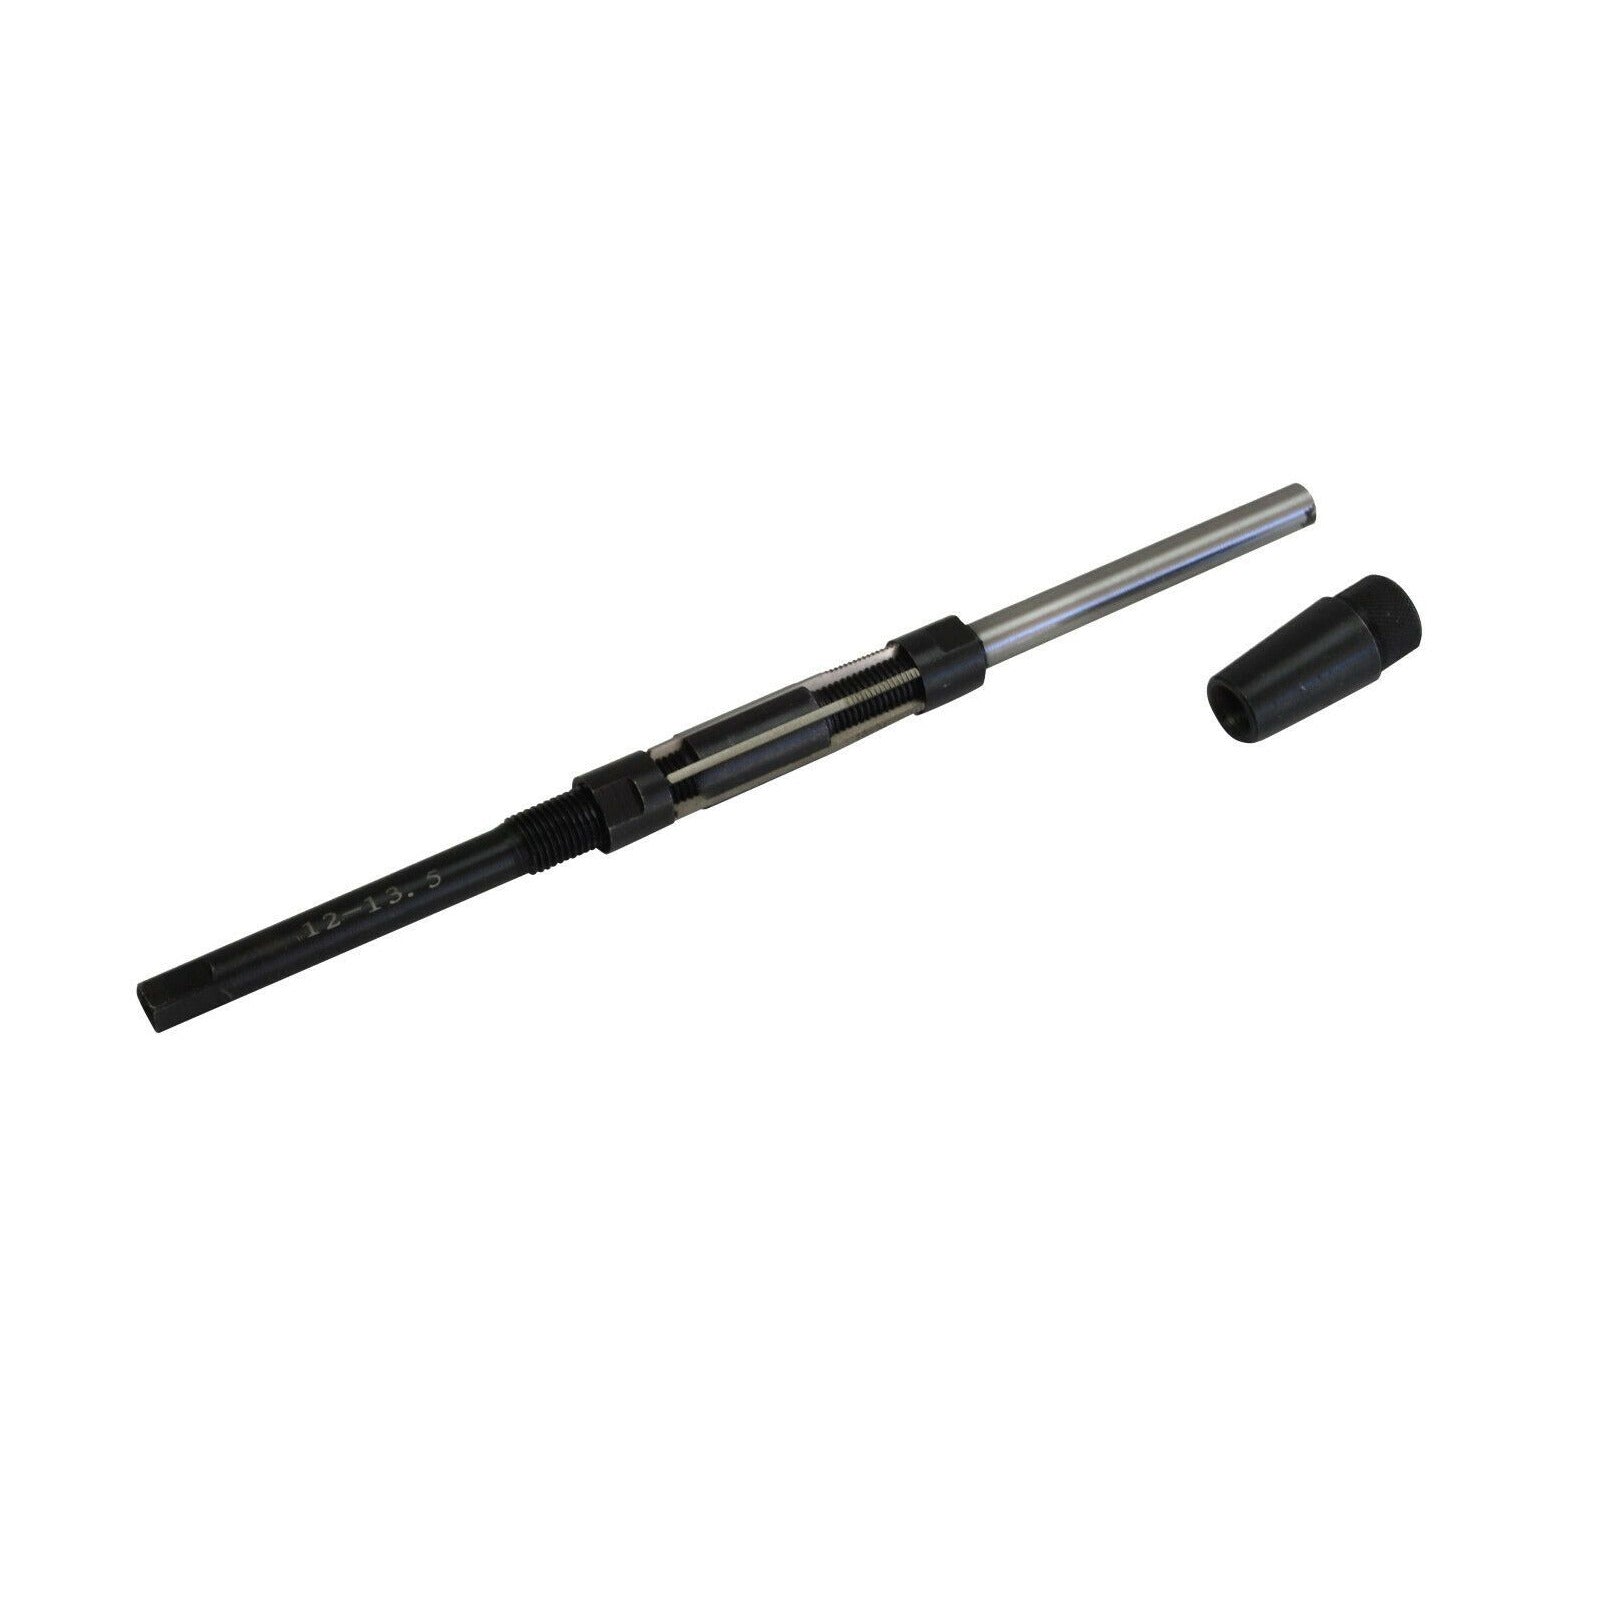 12 -13.5 mm Adjustable Hand Reamer with Guide